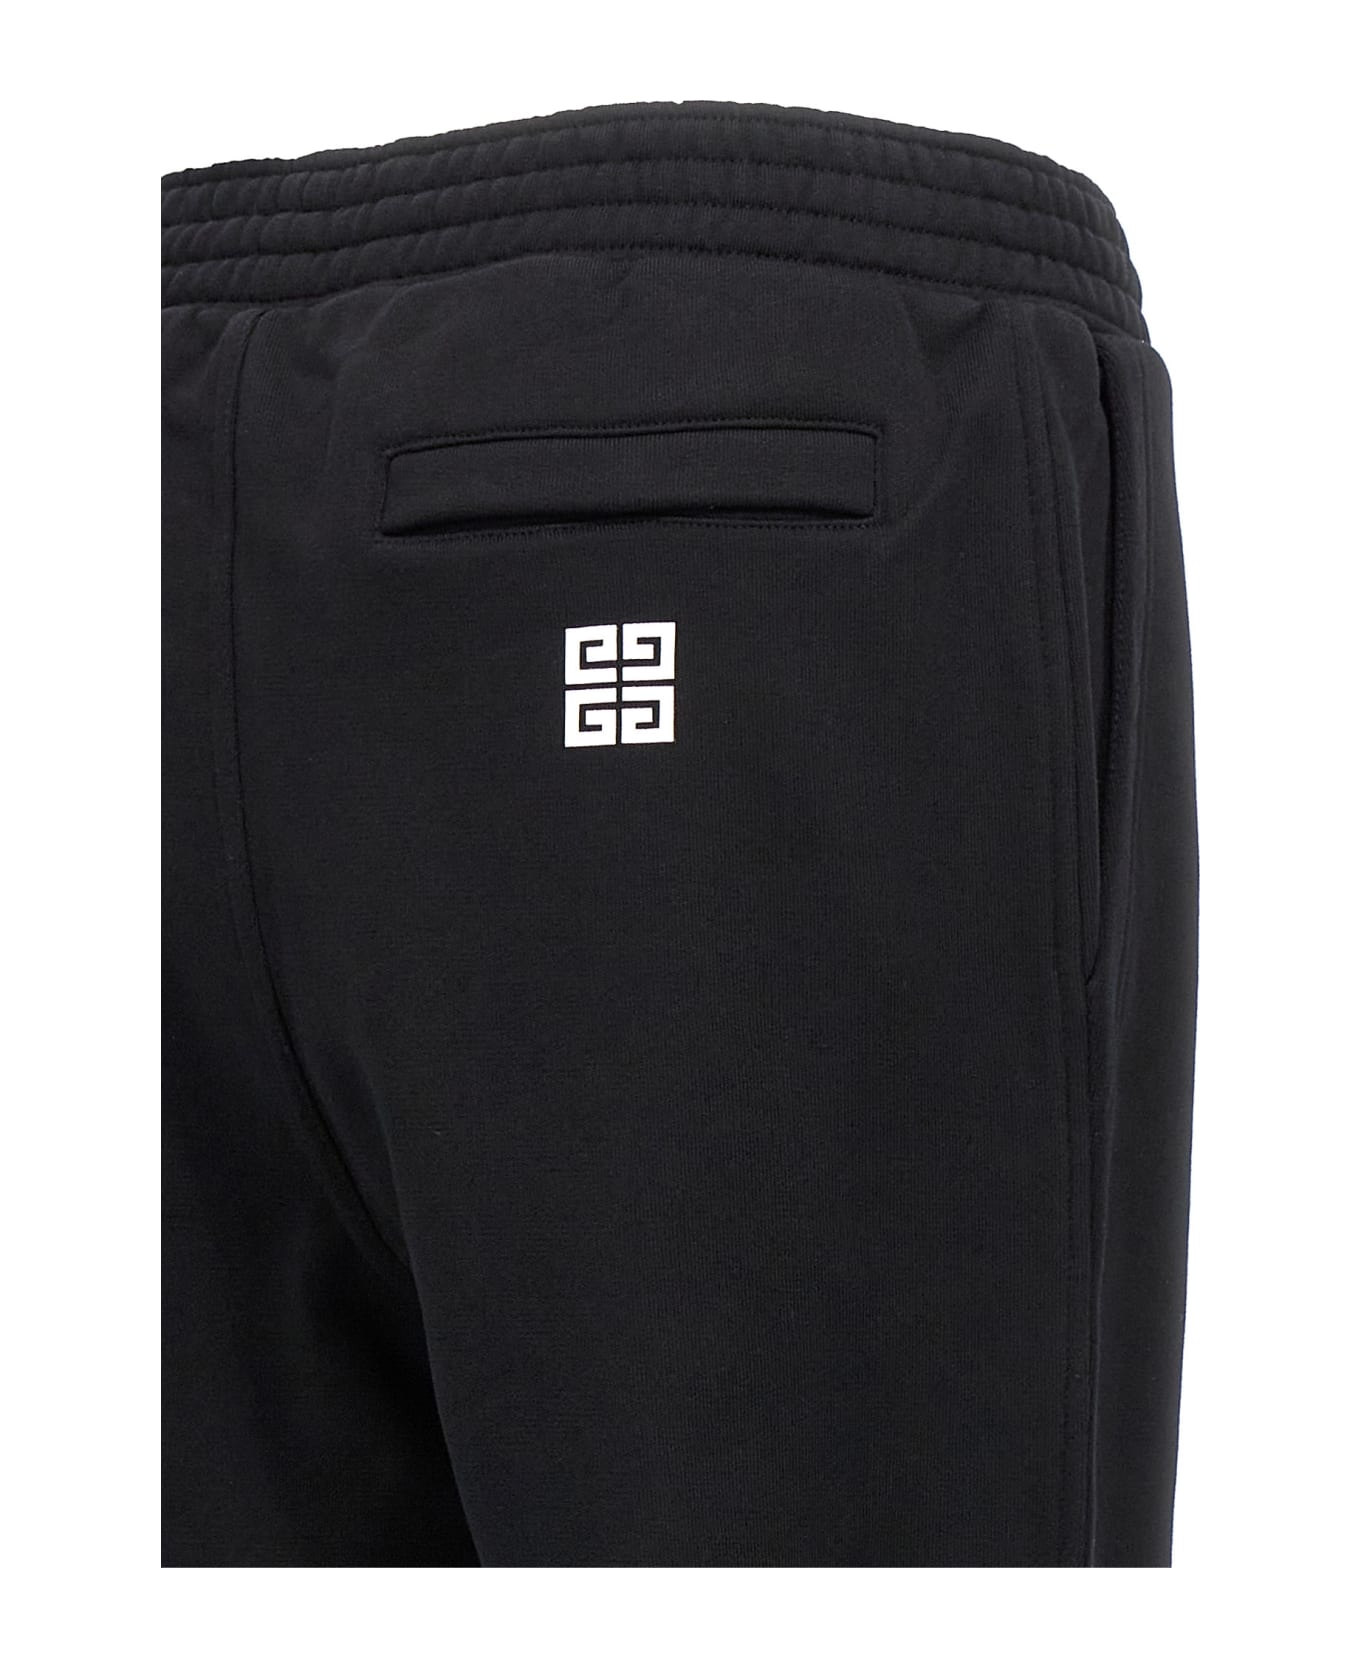 Givenchy Archetype Trousers - Black